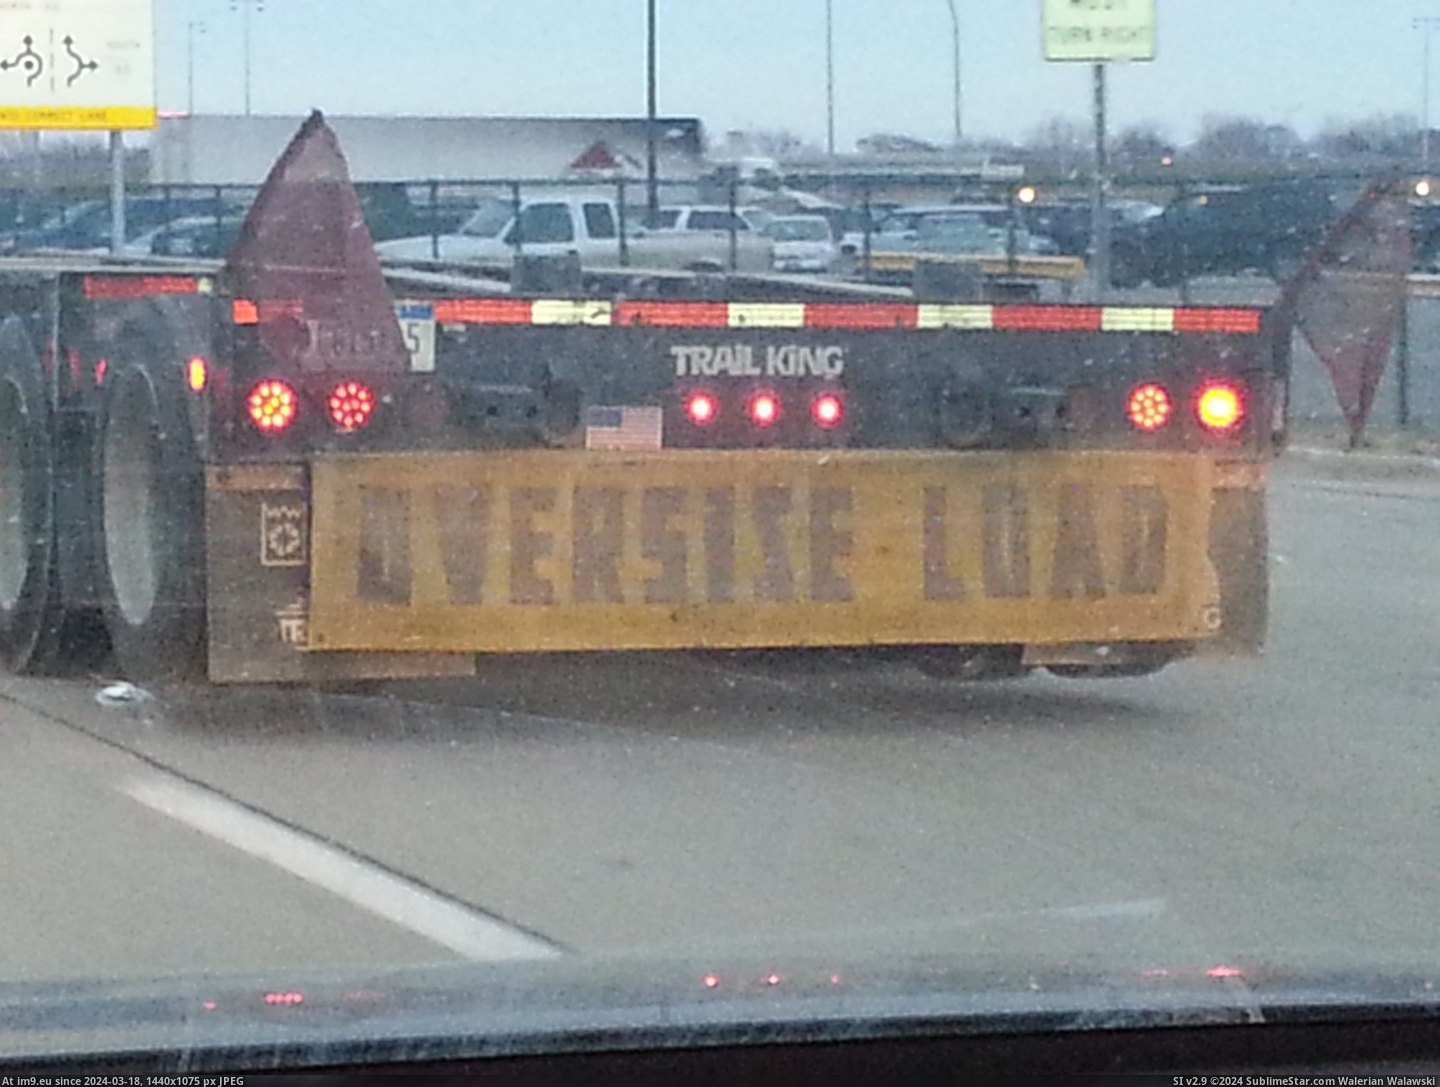 #Load #Oversized #Thinks [Mildlyinteresting] The 'z' on this 'Oversized load' sign thinks its an 's'. Pic. (Изображение из альбом My r/MILDLYINTERESTING favs))